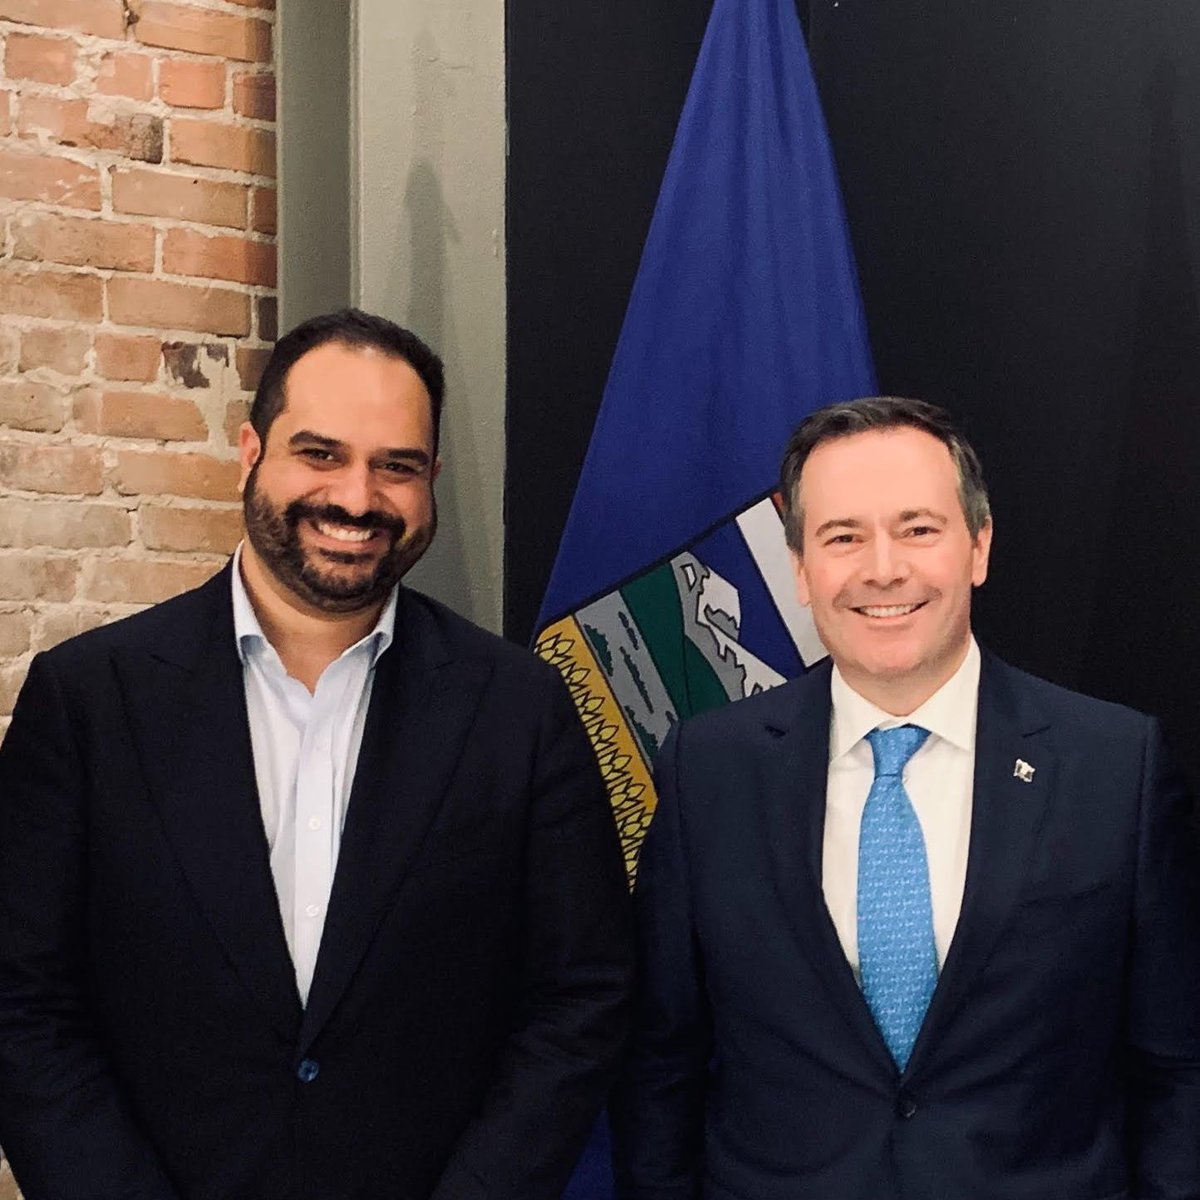 We are honored to have had @Cherif, CEO of our portfolio company @godialogue, meet with Premier @jkenney yesterday in their Montreal office to discuss how #telemedicine and #innovation can improve access to #healthcare for Albertans and all Canadians. #Canada